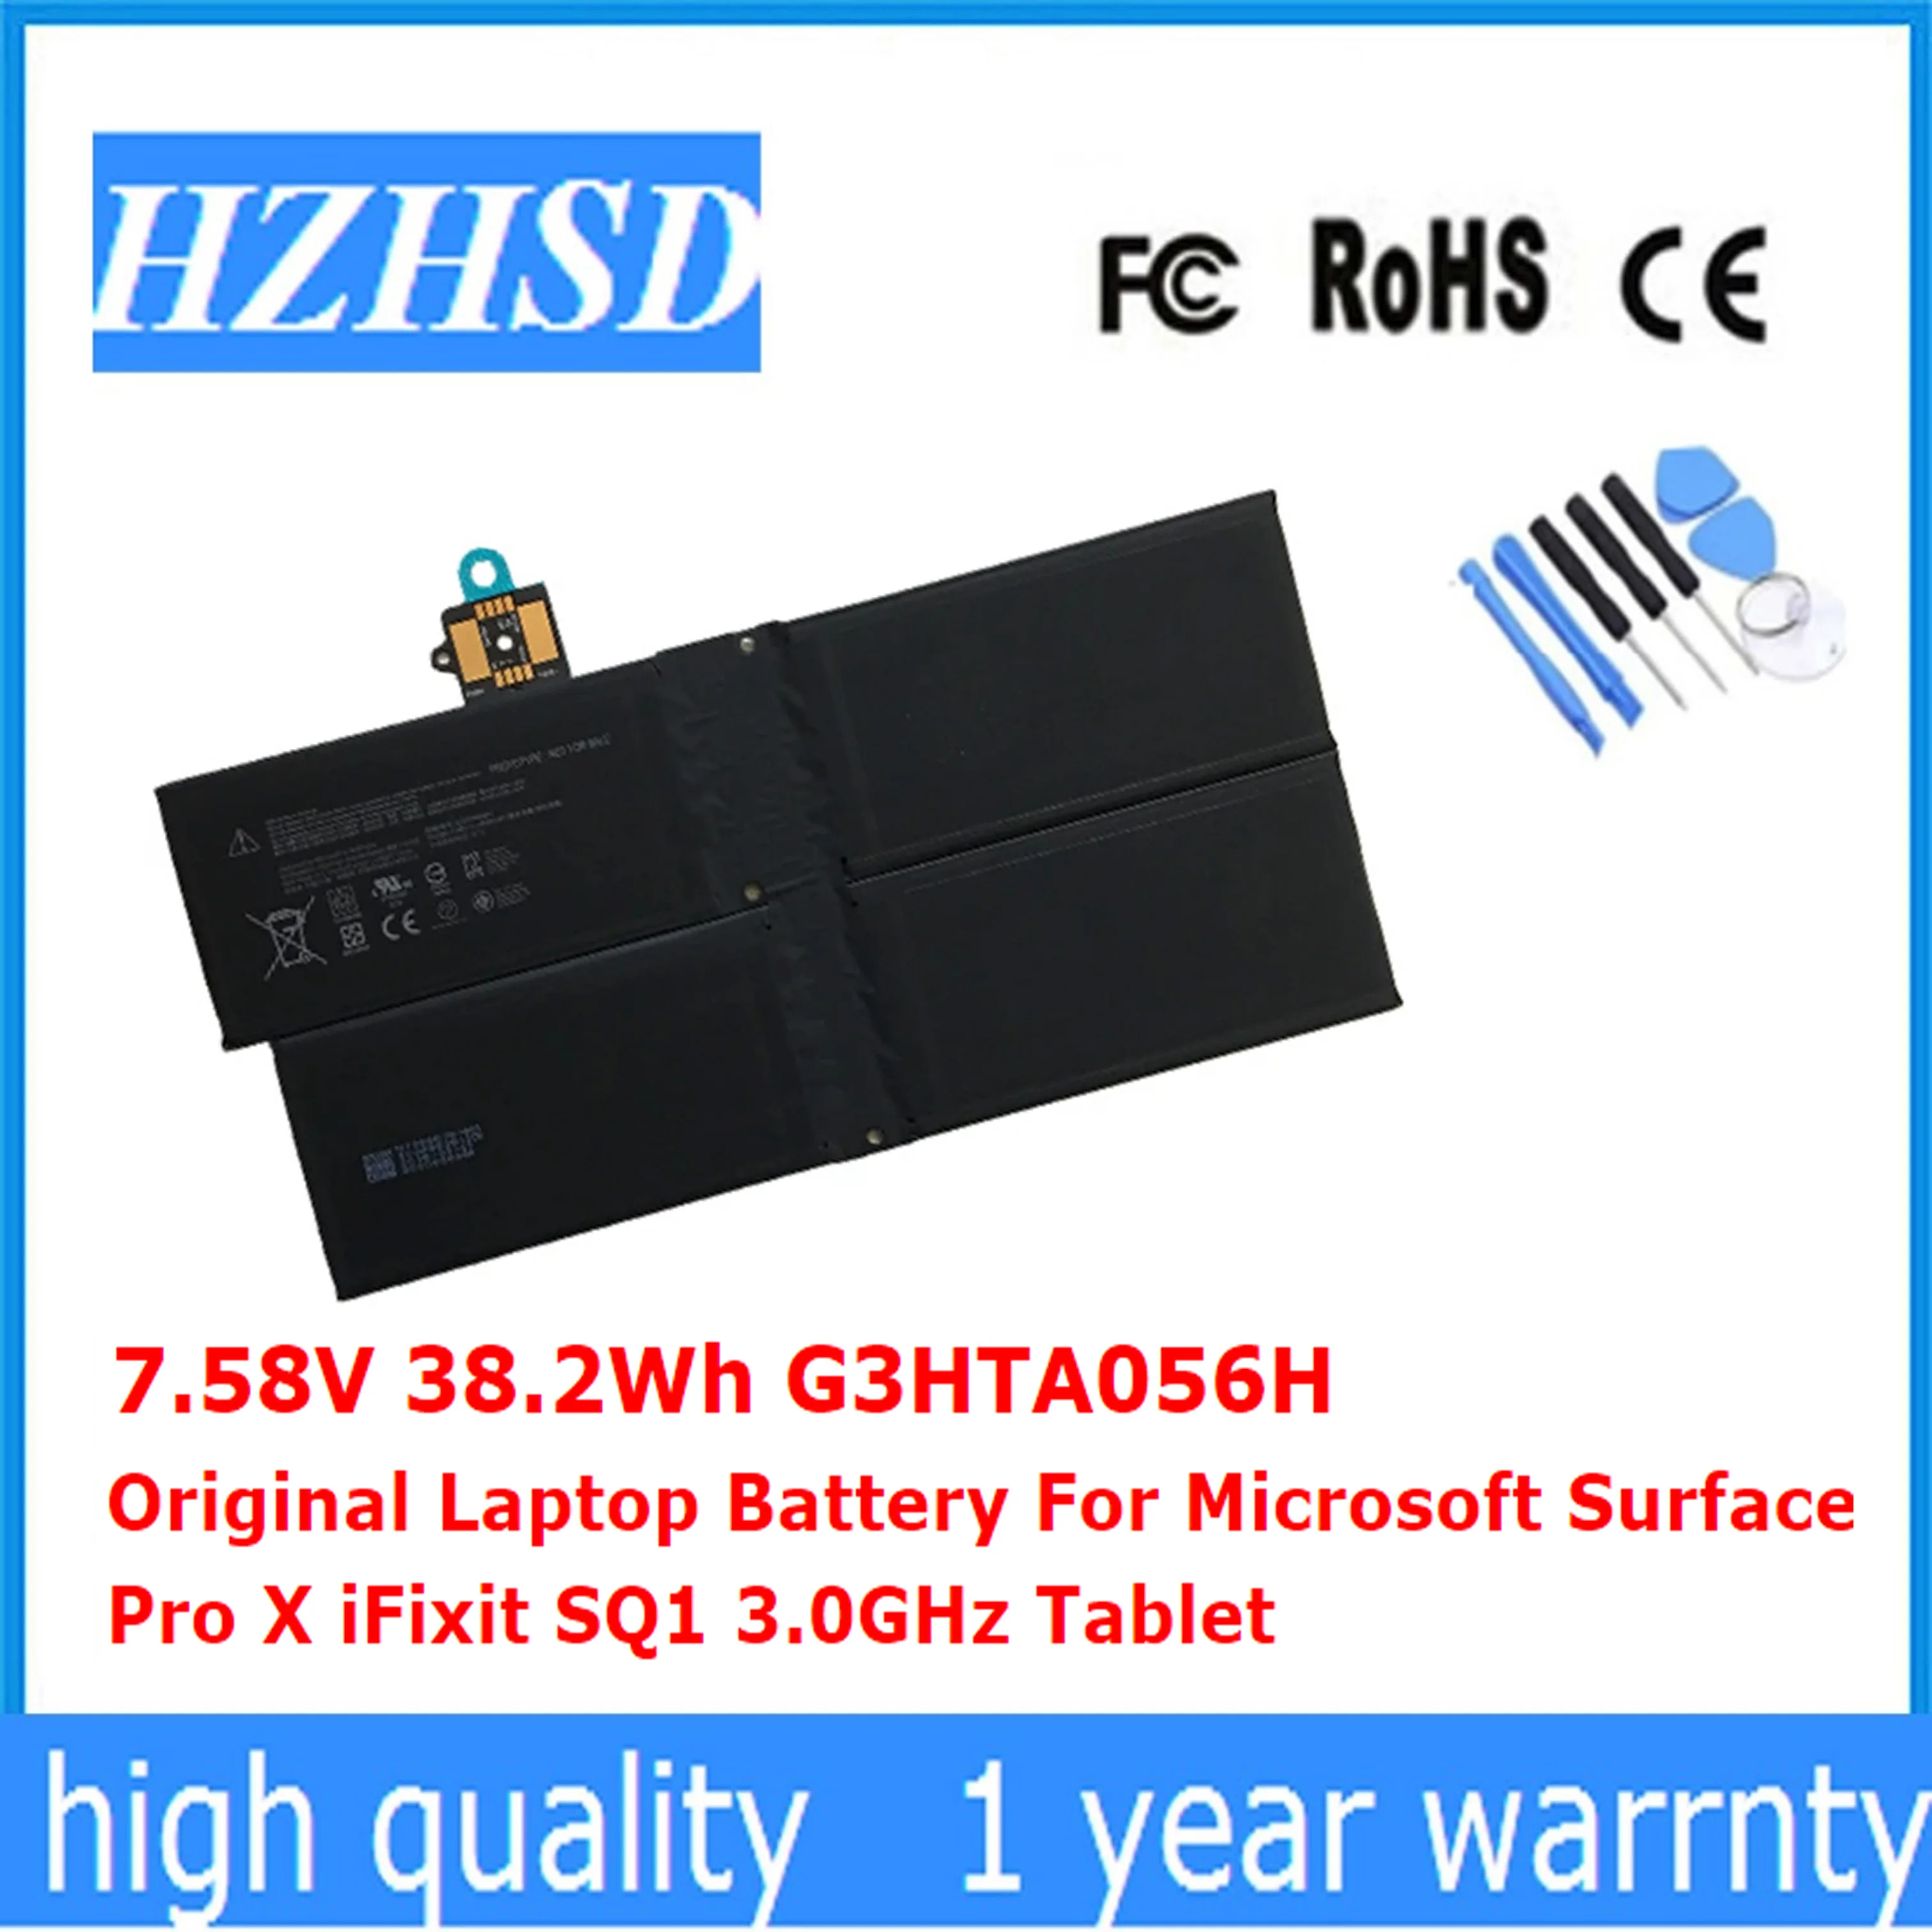 

7.58V 38.2Wh G3HTA056H 1876 MQ03 Original Laptop Battery For Microsoft Surface Pro X 13 inch iFixit SQ1 3.0GHz